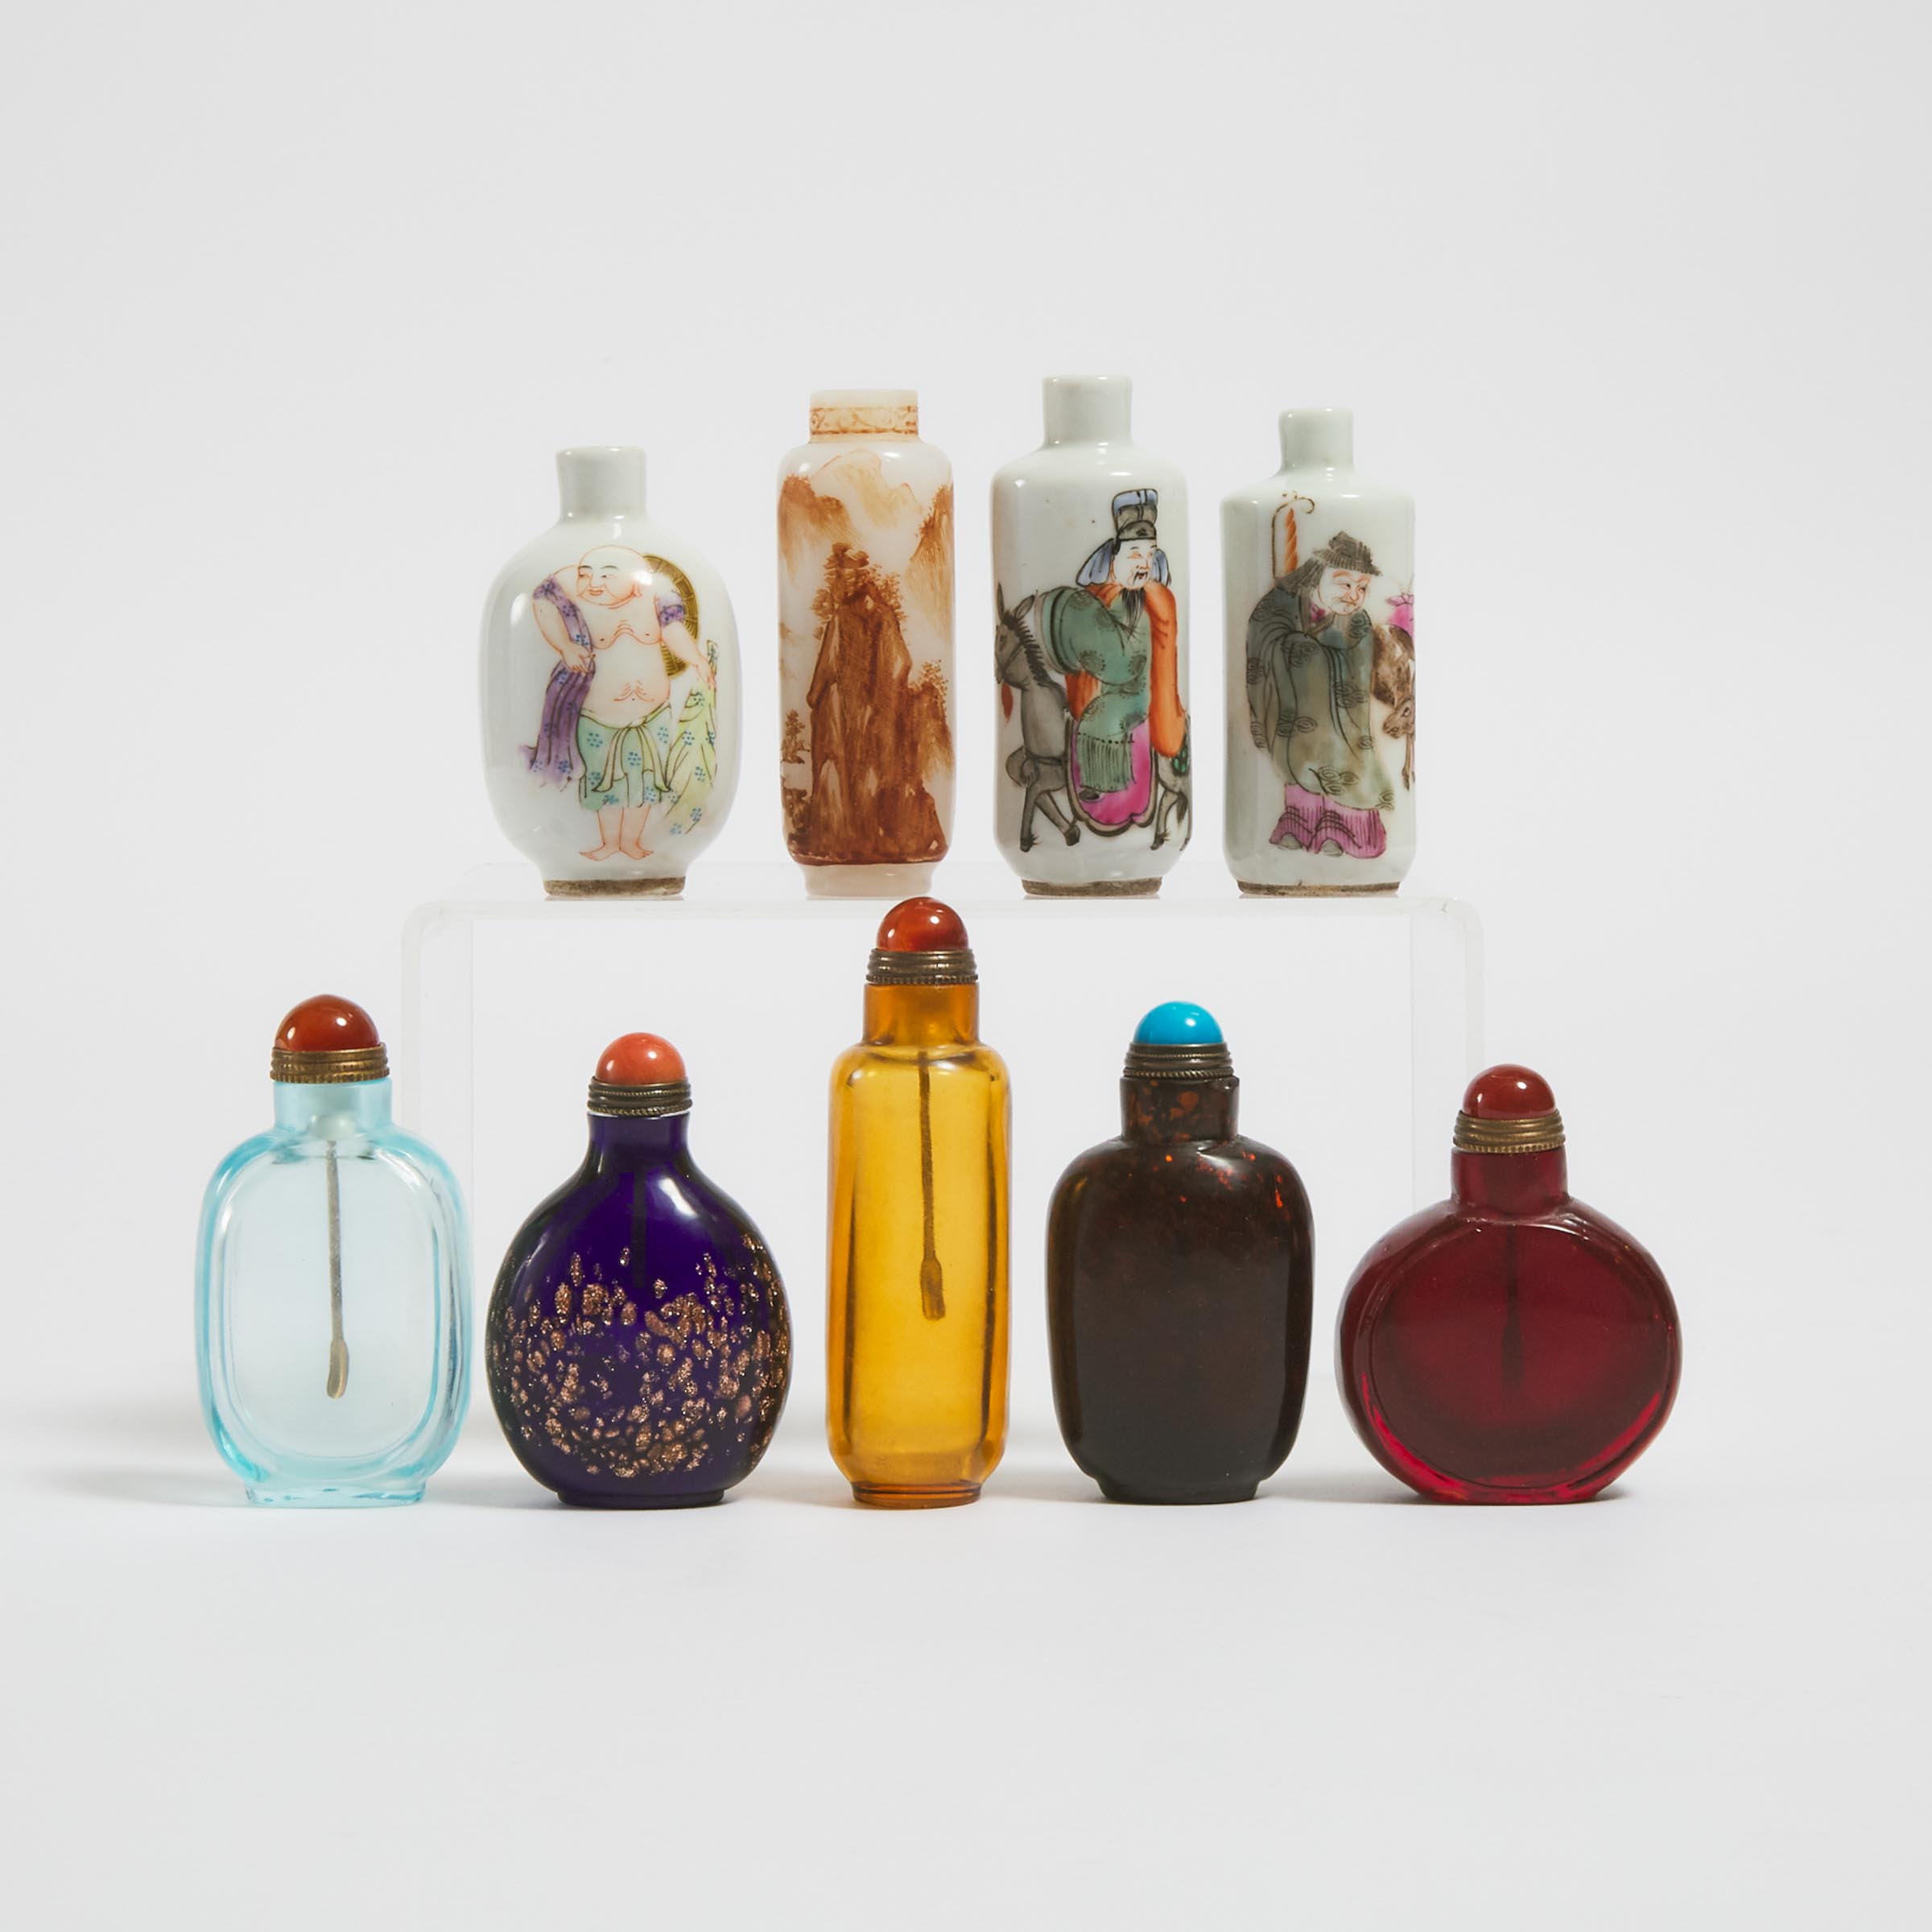 A Group of Nine Porcelain and Glass Snuff Bottles, 19th Century and Later